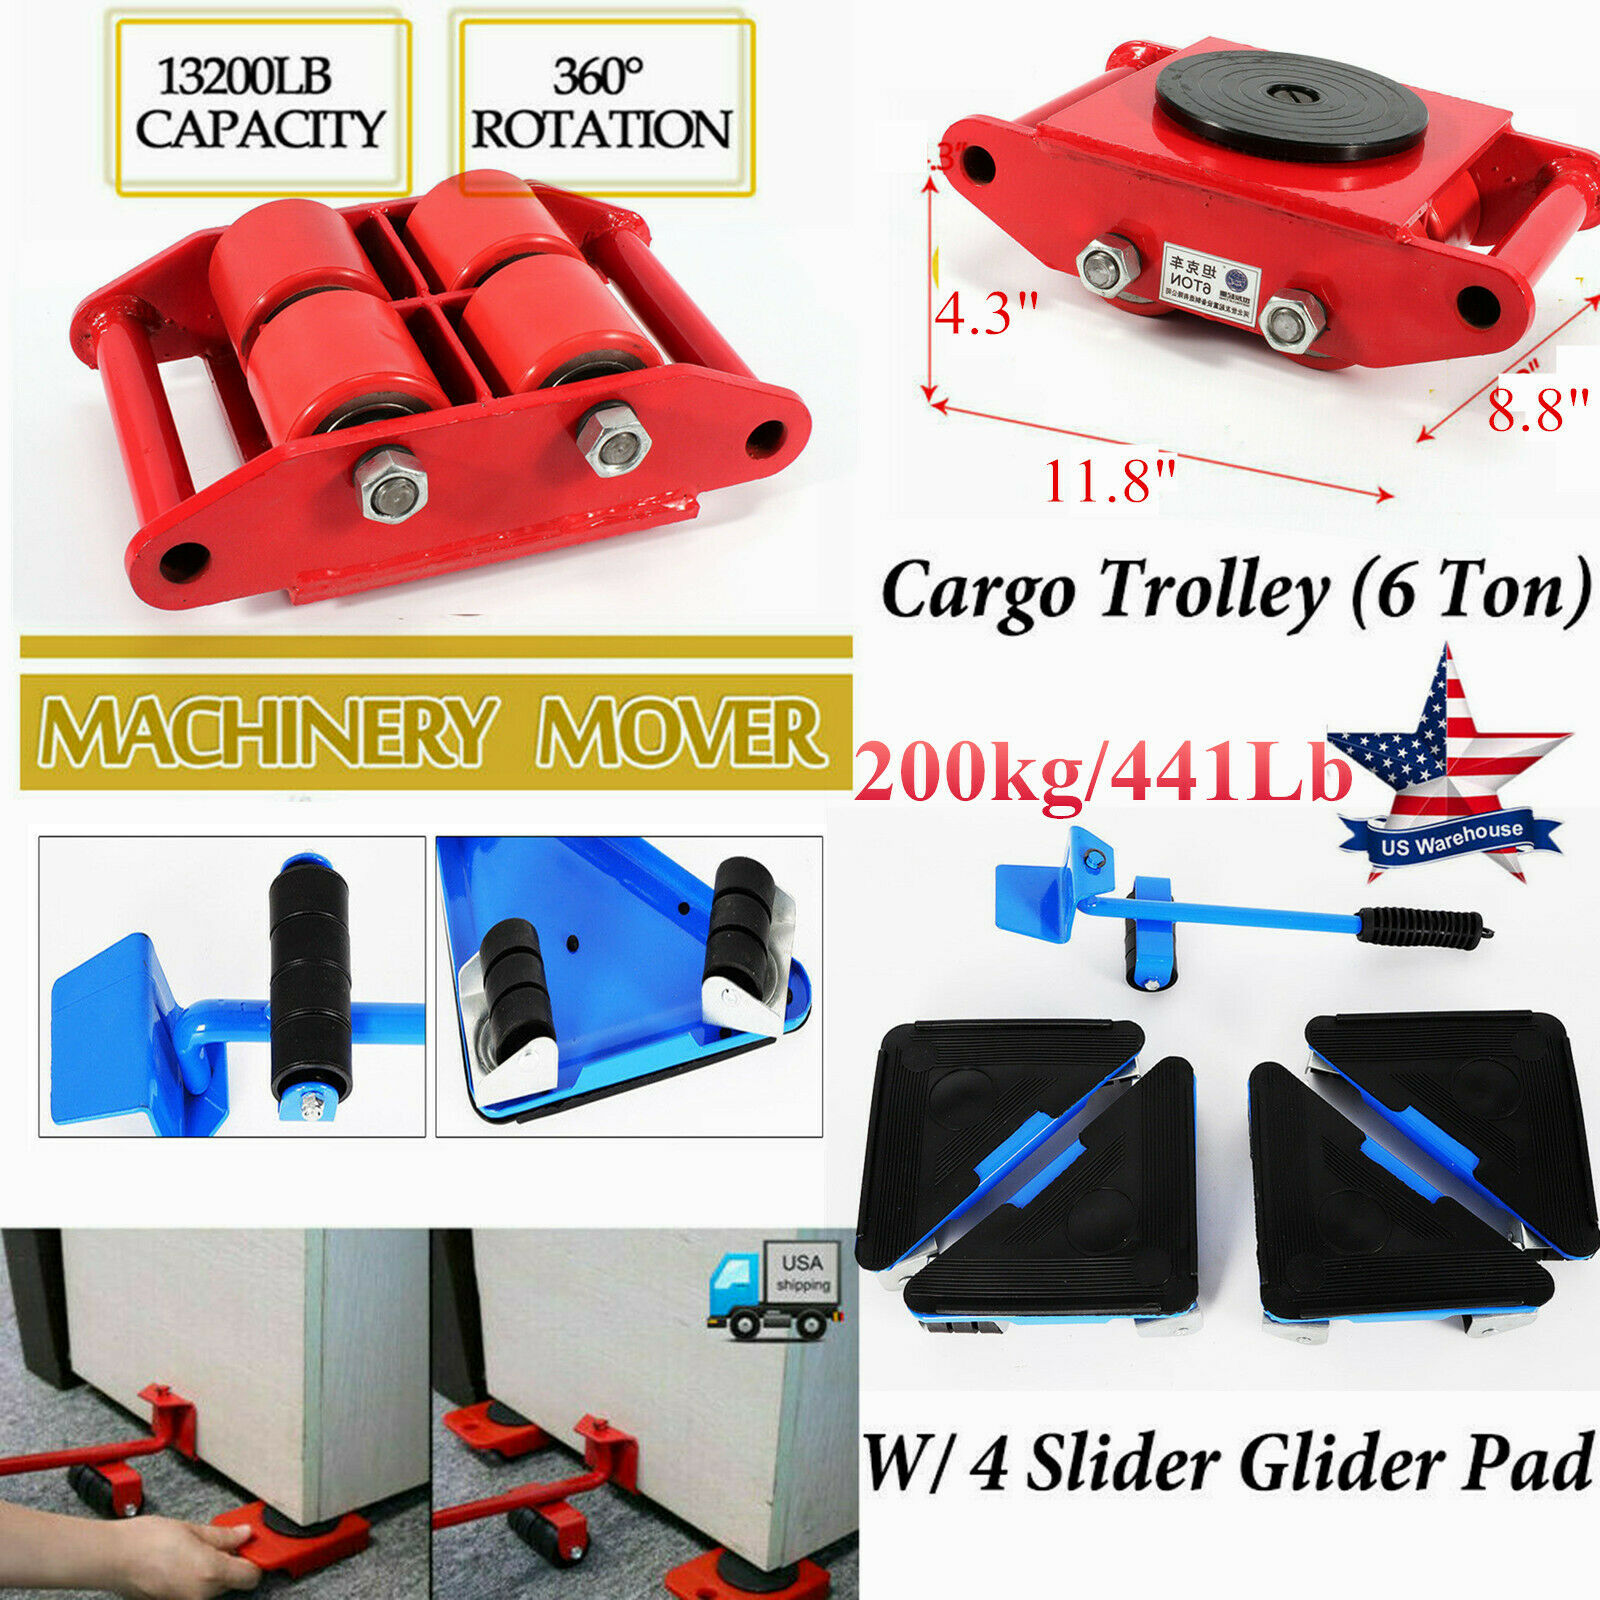 Heavy Duty Machine Dolly Skate Machinery Roller Mover Cargo Trolley/4 Slider Pad